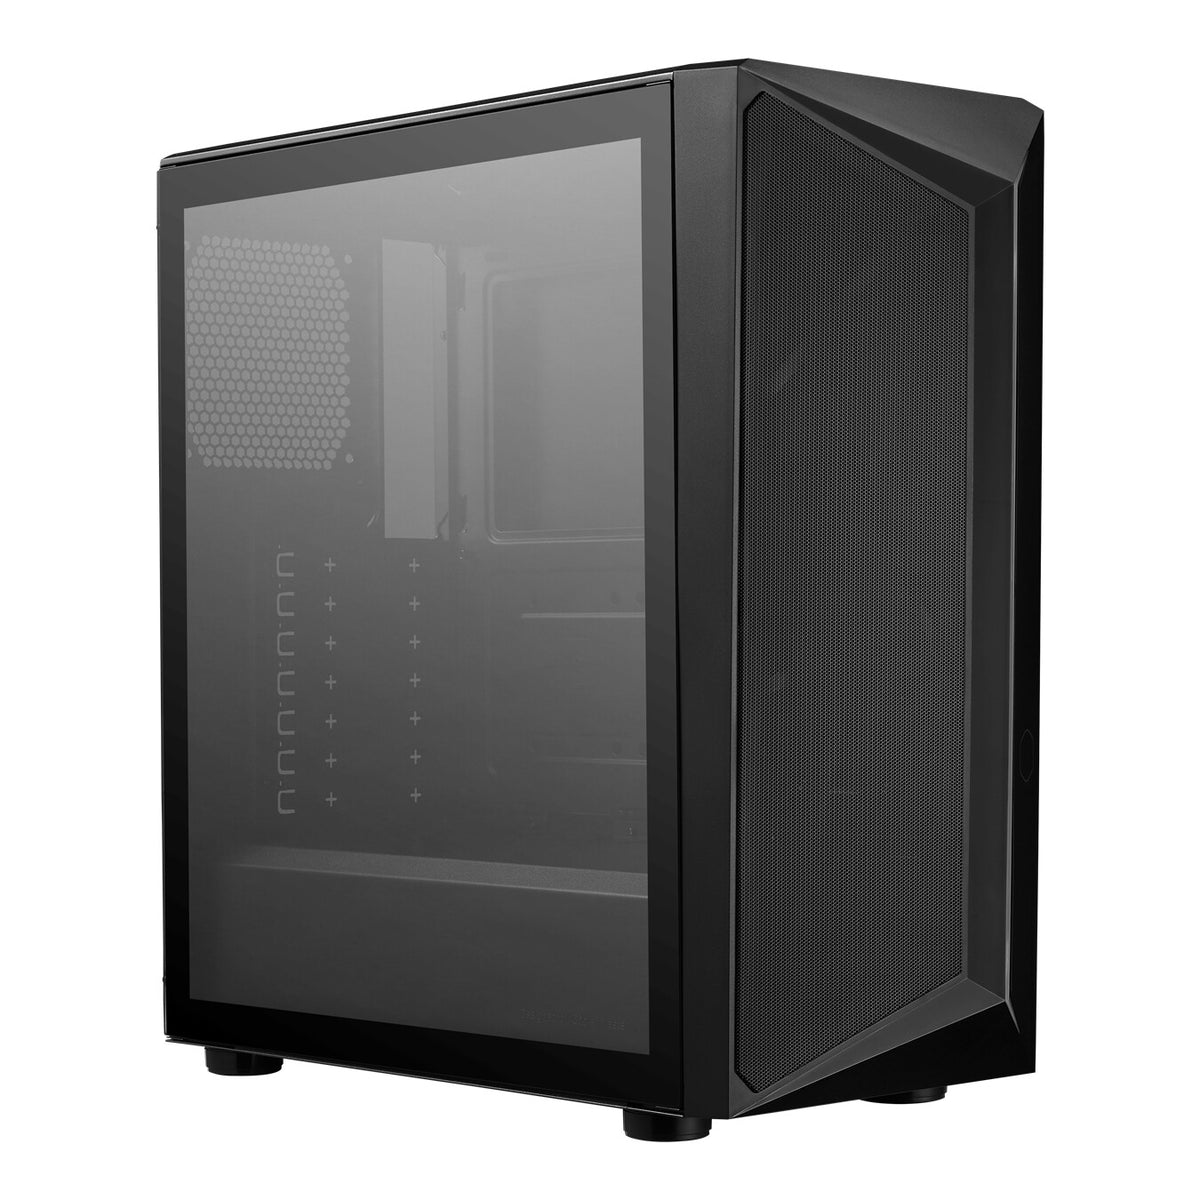 Cooler Master CMP 510 - ATX Mid Tower Case in Black